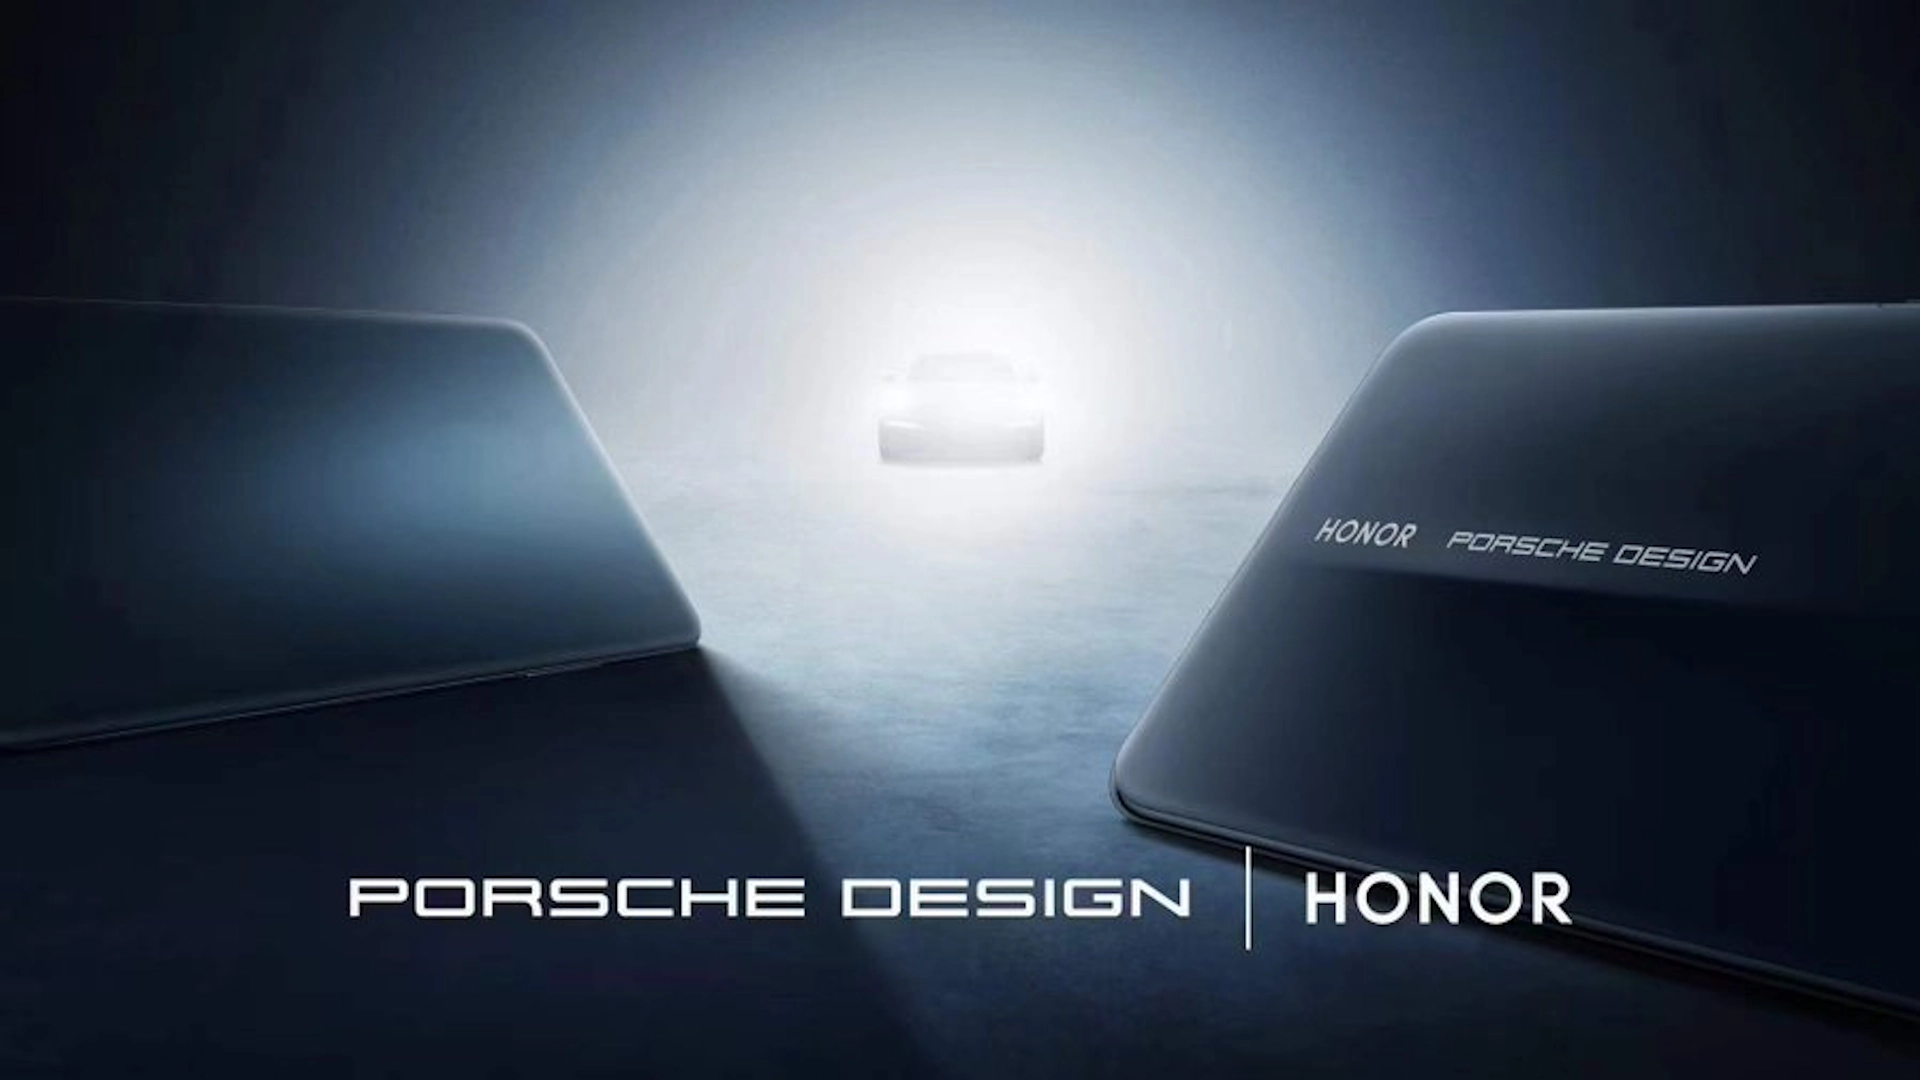 The launch of the Honor Magic6 Porsche Design model is approaching, the first teaser is online